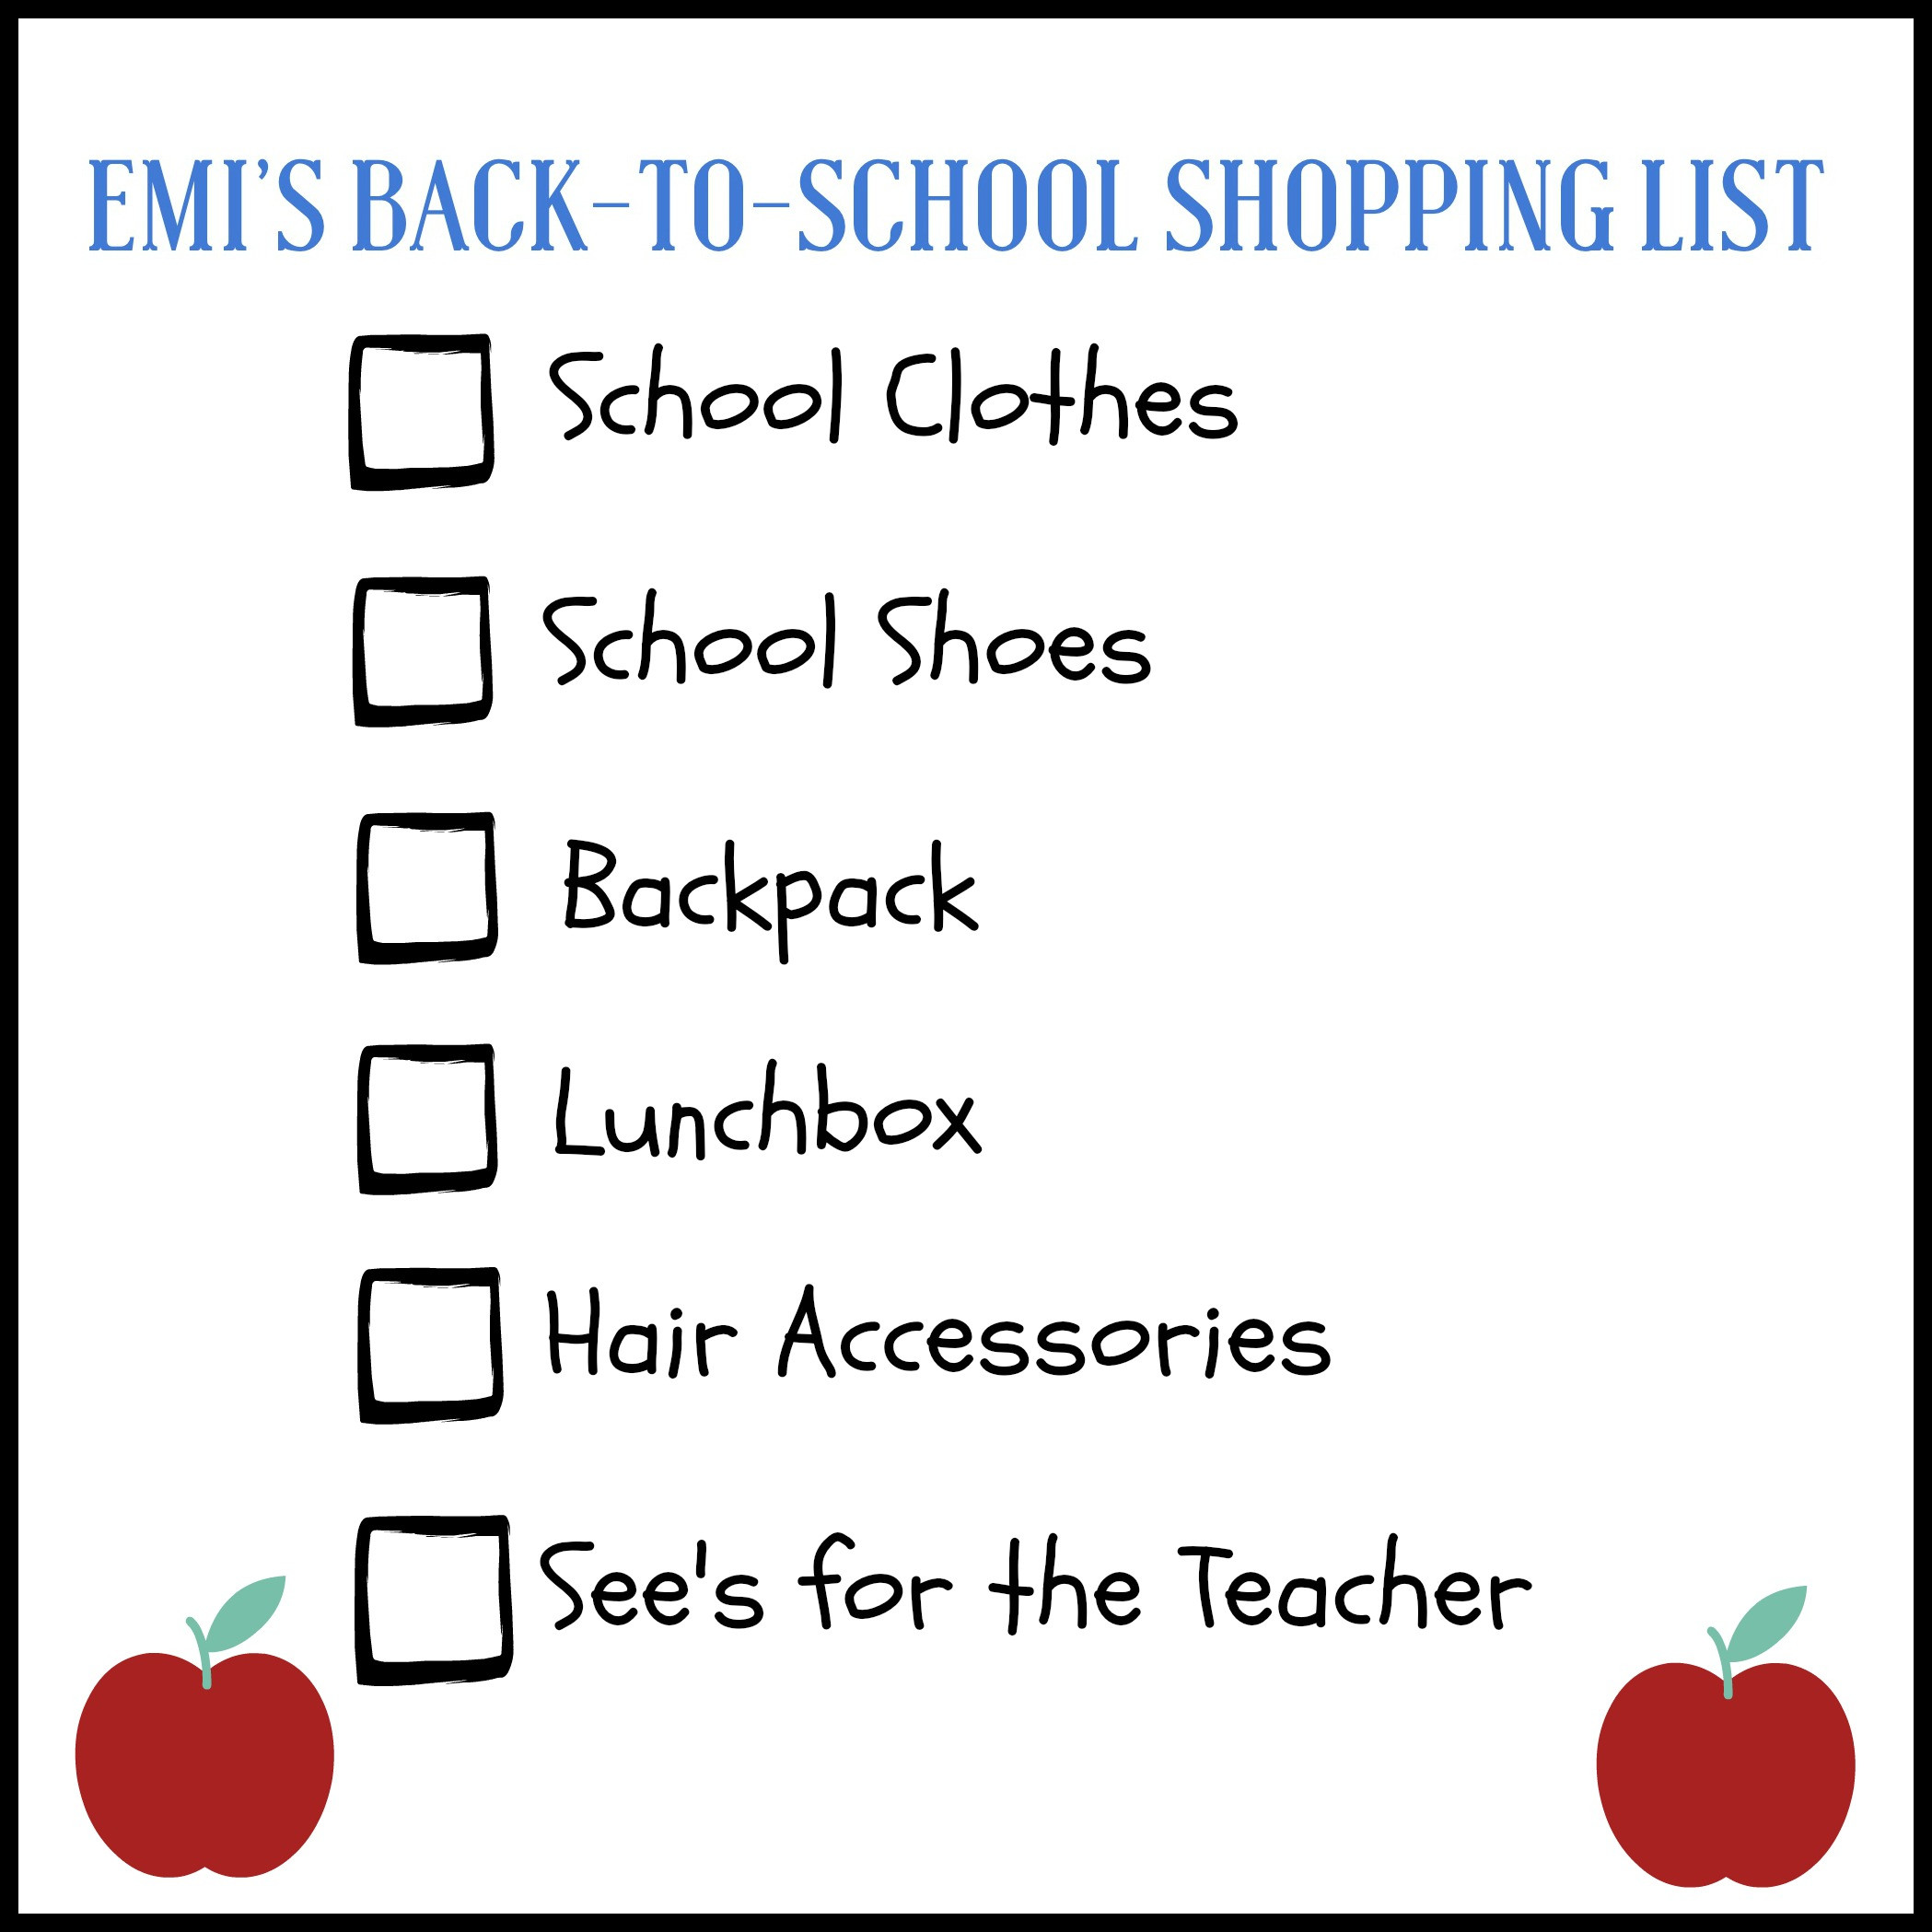 Back To School Shopping List
 Let’s Go Back to School Shopping at The Shops at Mission